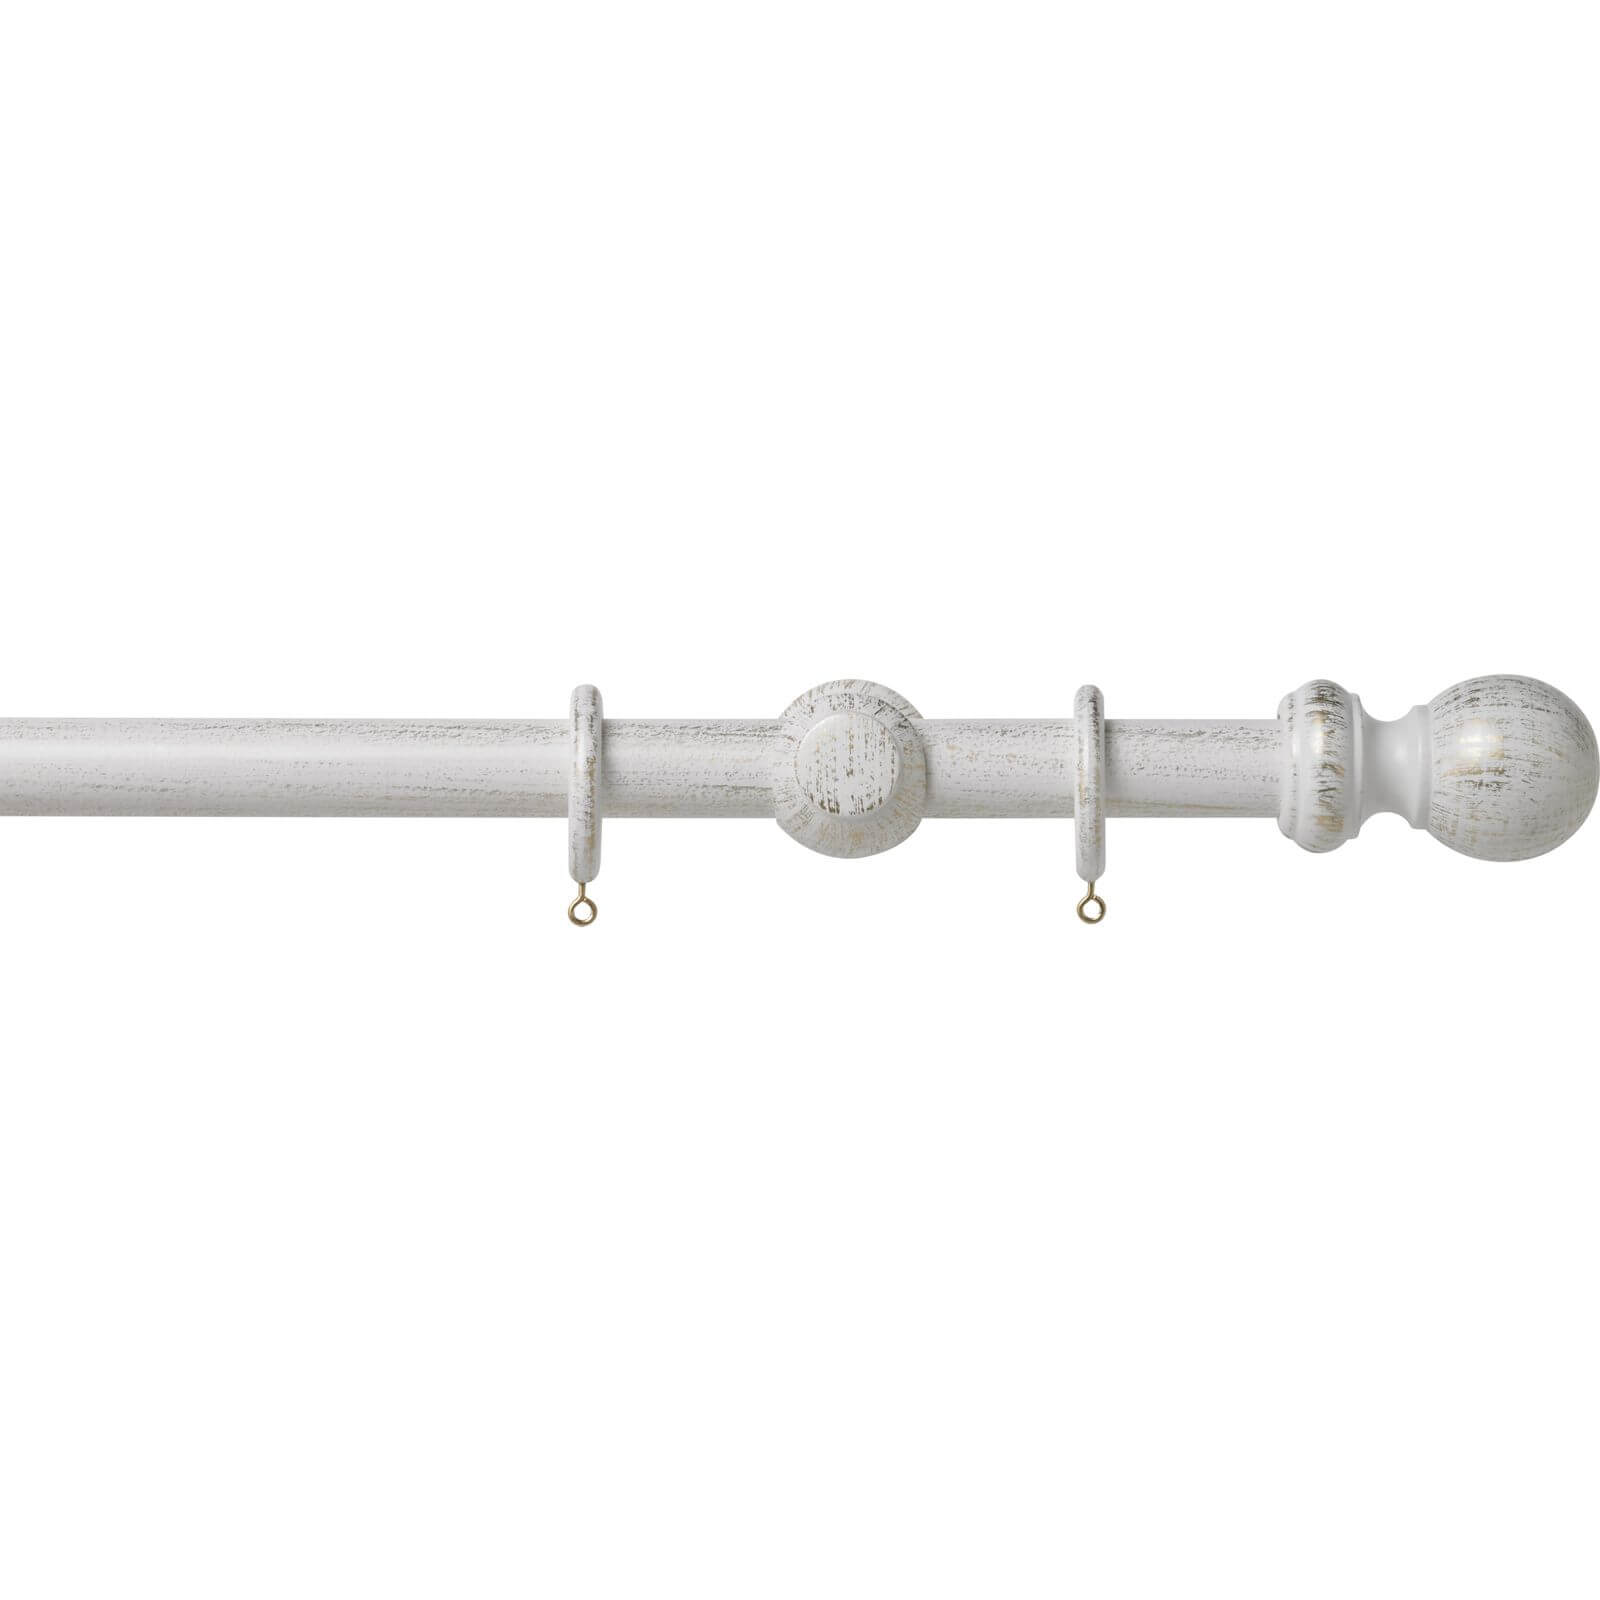 Scratched White Wood 28mm Curtain Pole with Ball Finials - 1.8m